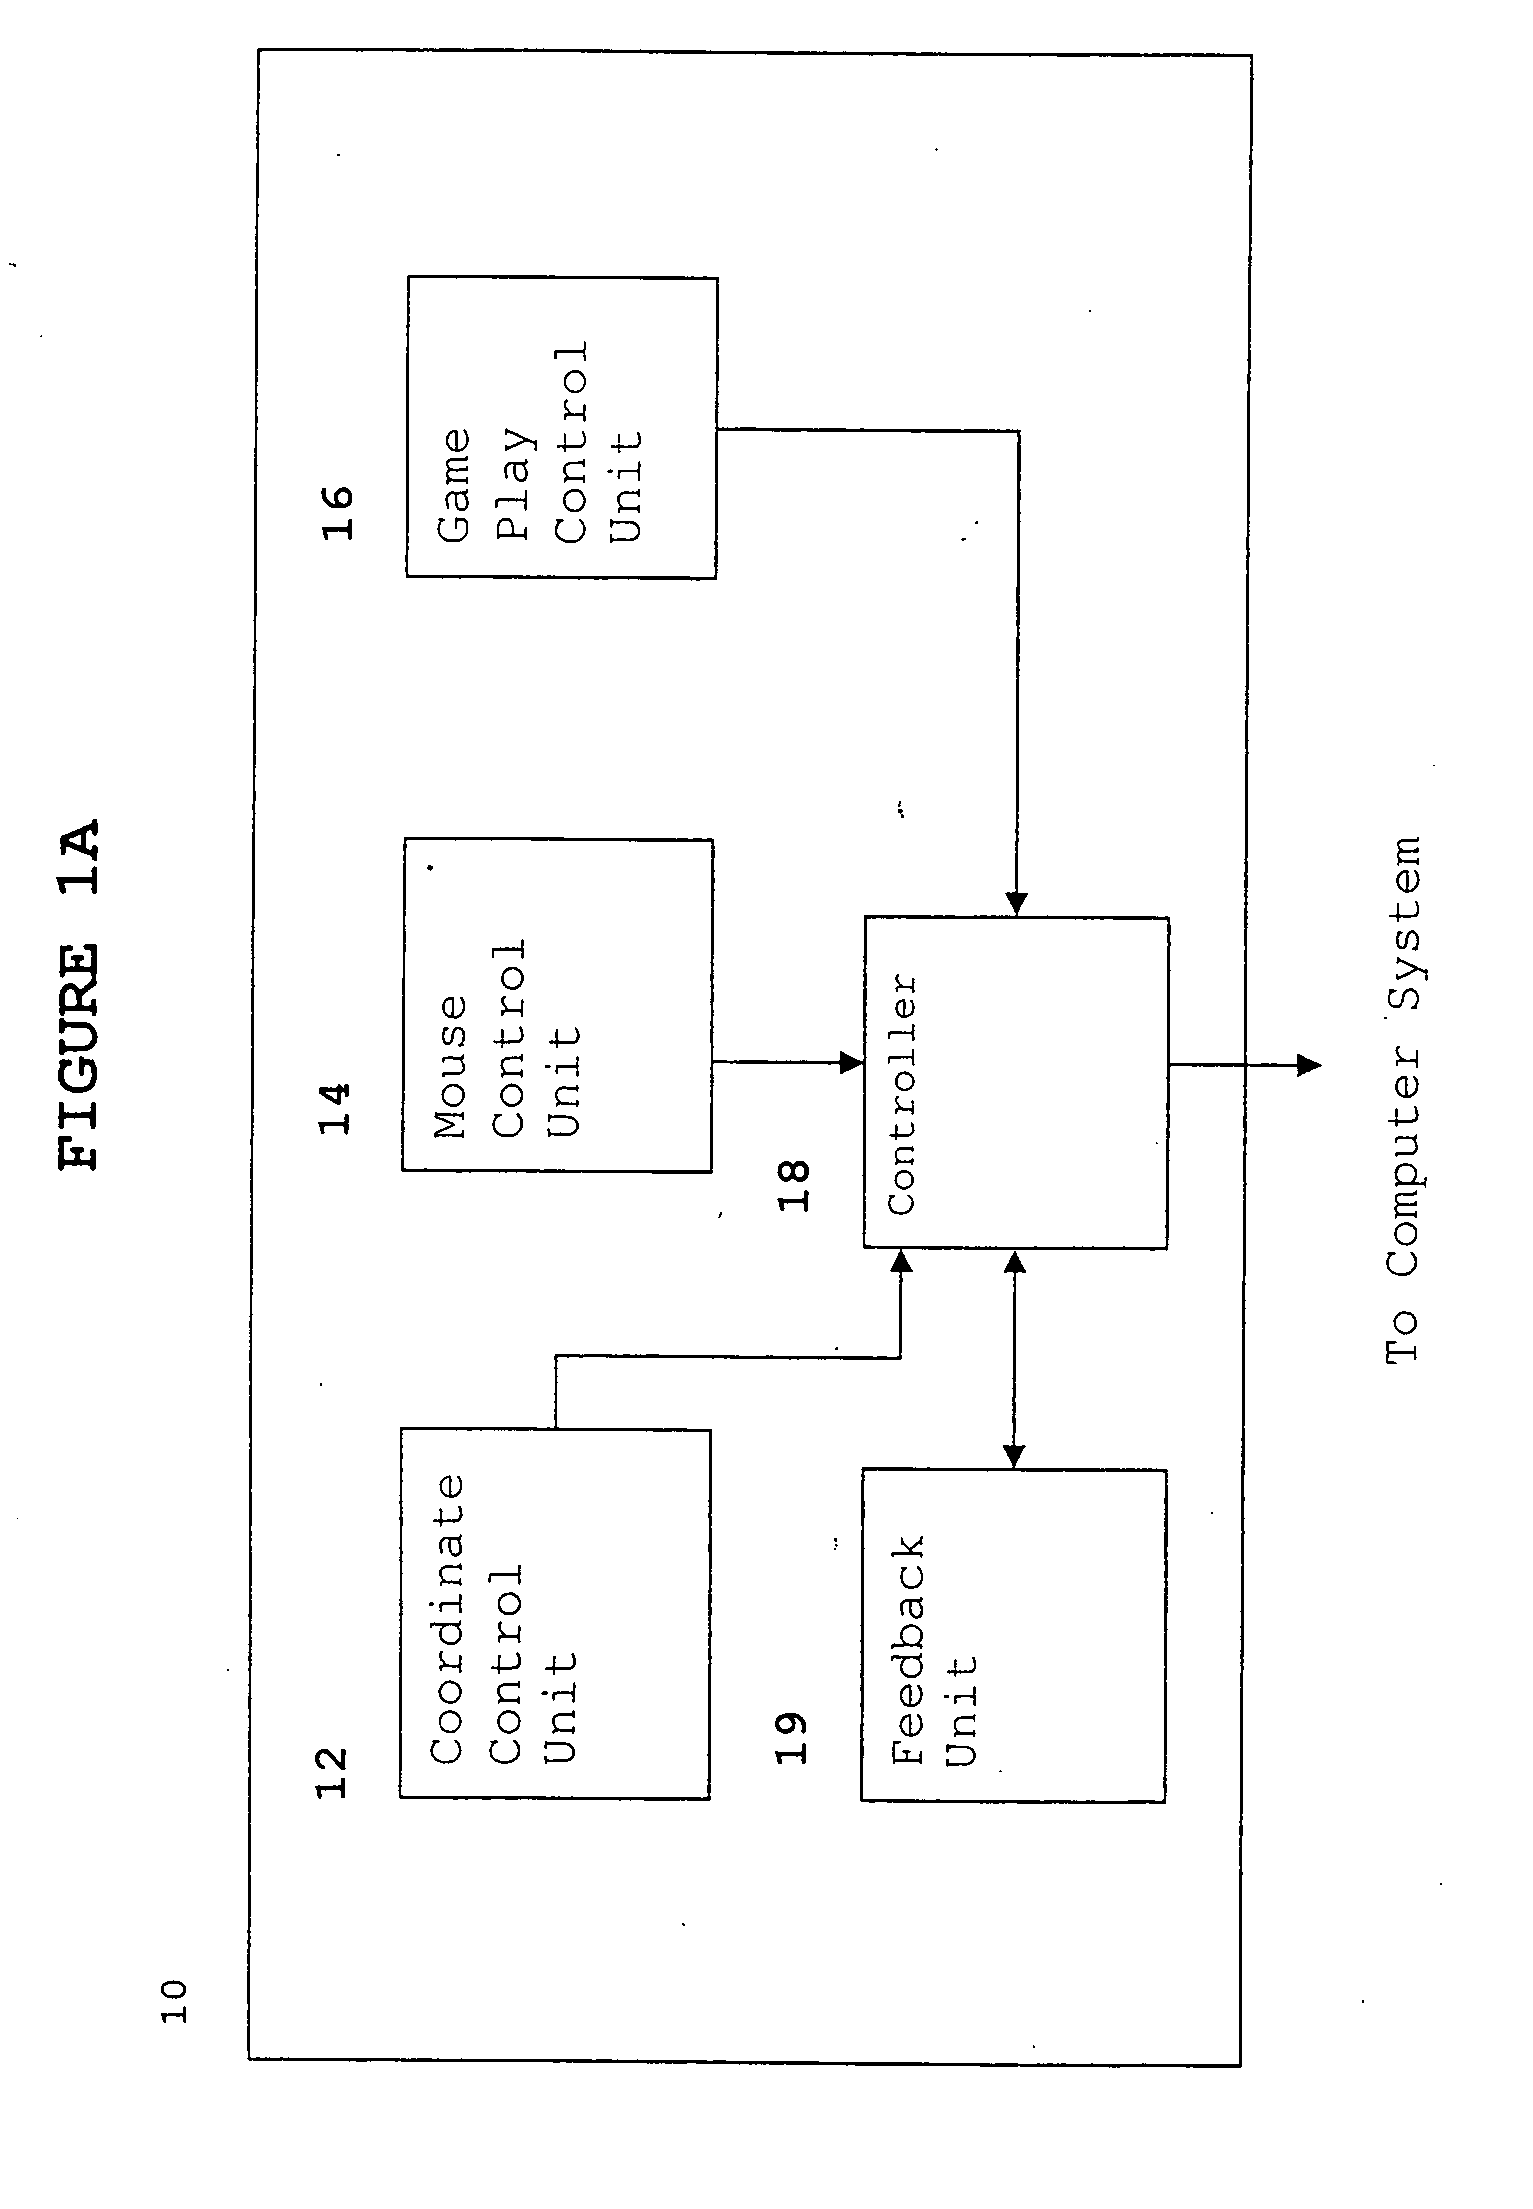 Control apparatus for use with a computer or video game system